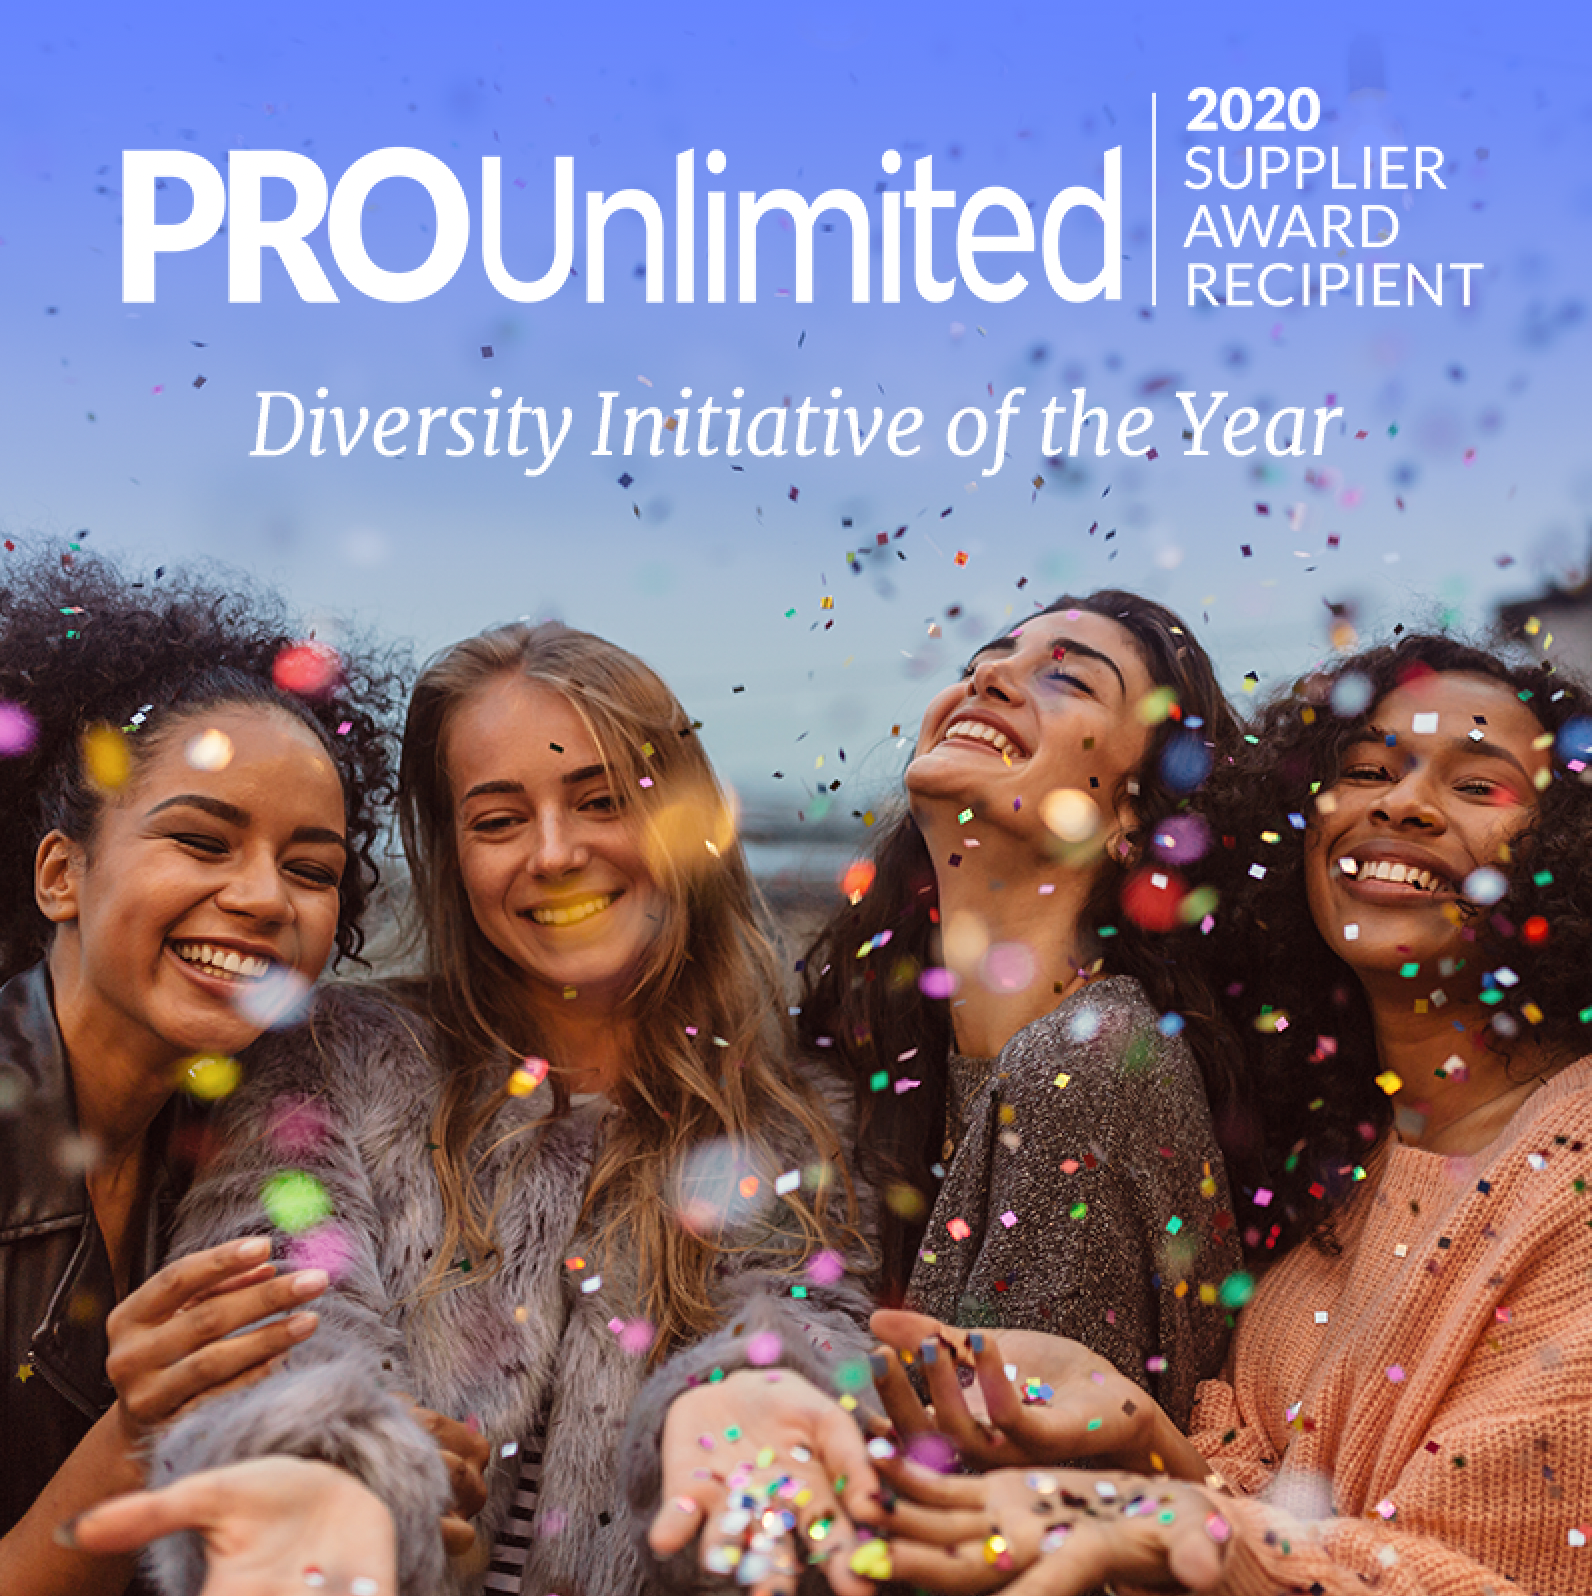 The Mom Project Recognized as a Supplier of The Year by PRO Unlimited